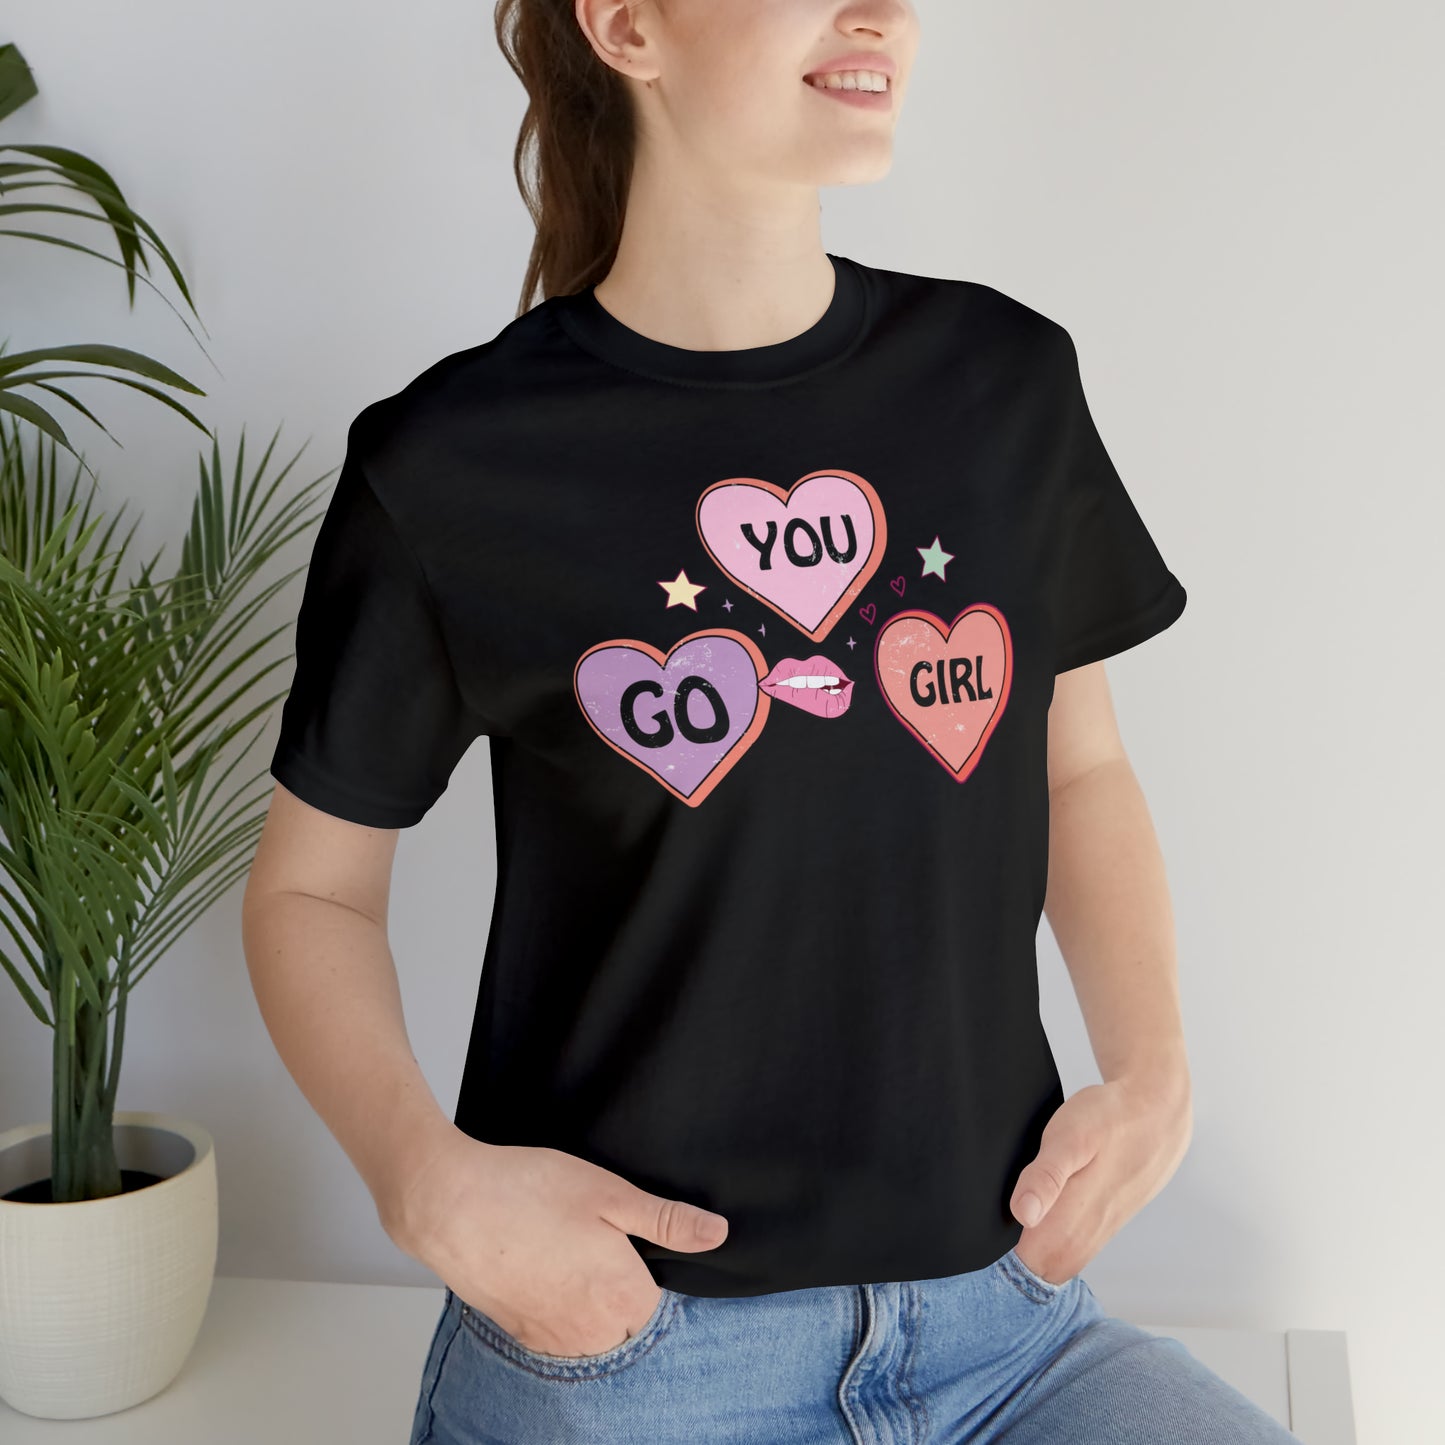 You Go Girl Ladies T Shirt | Women's Premium Soft Comfortable Tshirt | Confidence Boosting Slogan Tee | Words To Live By Top